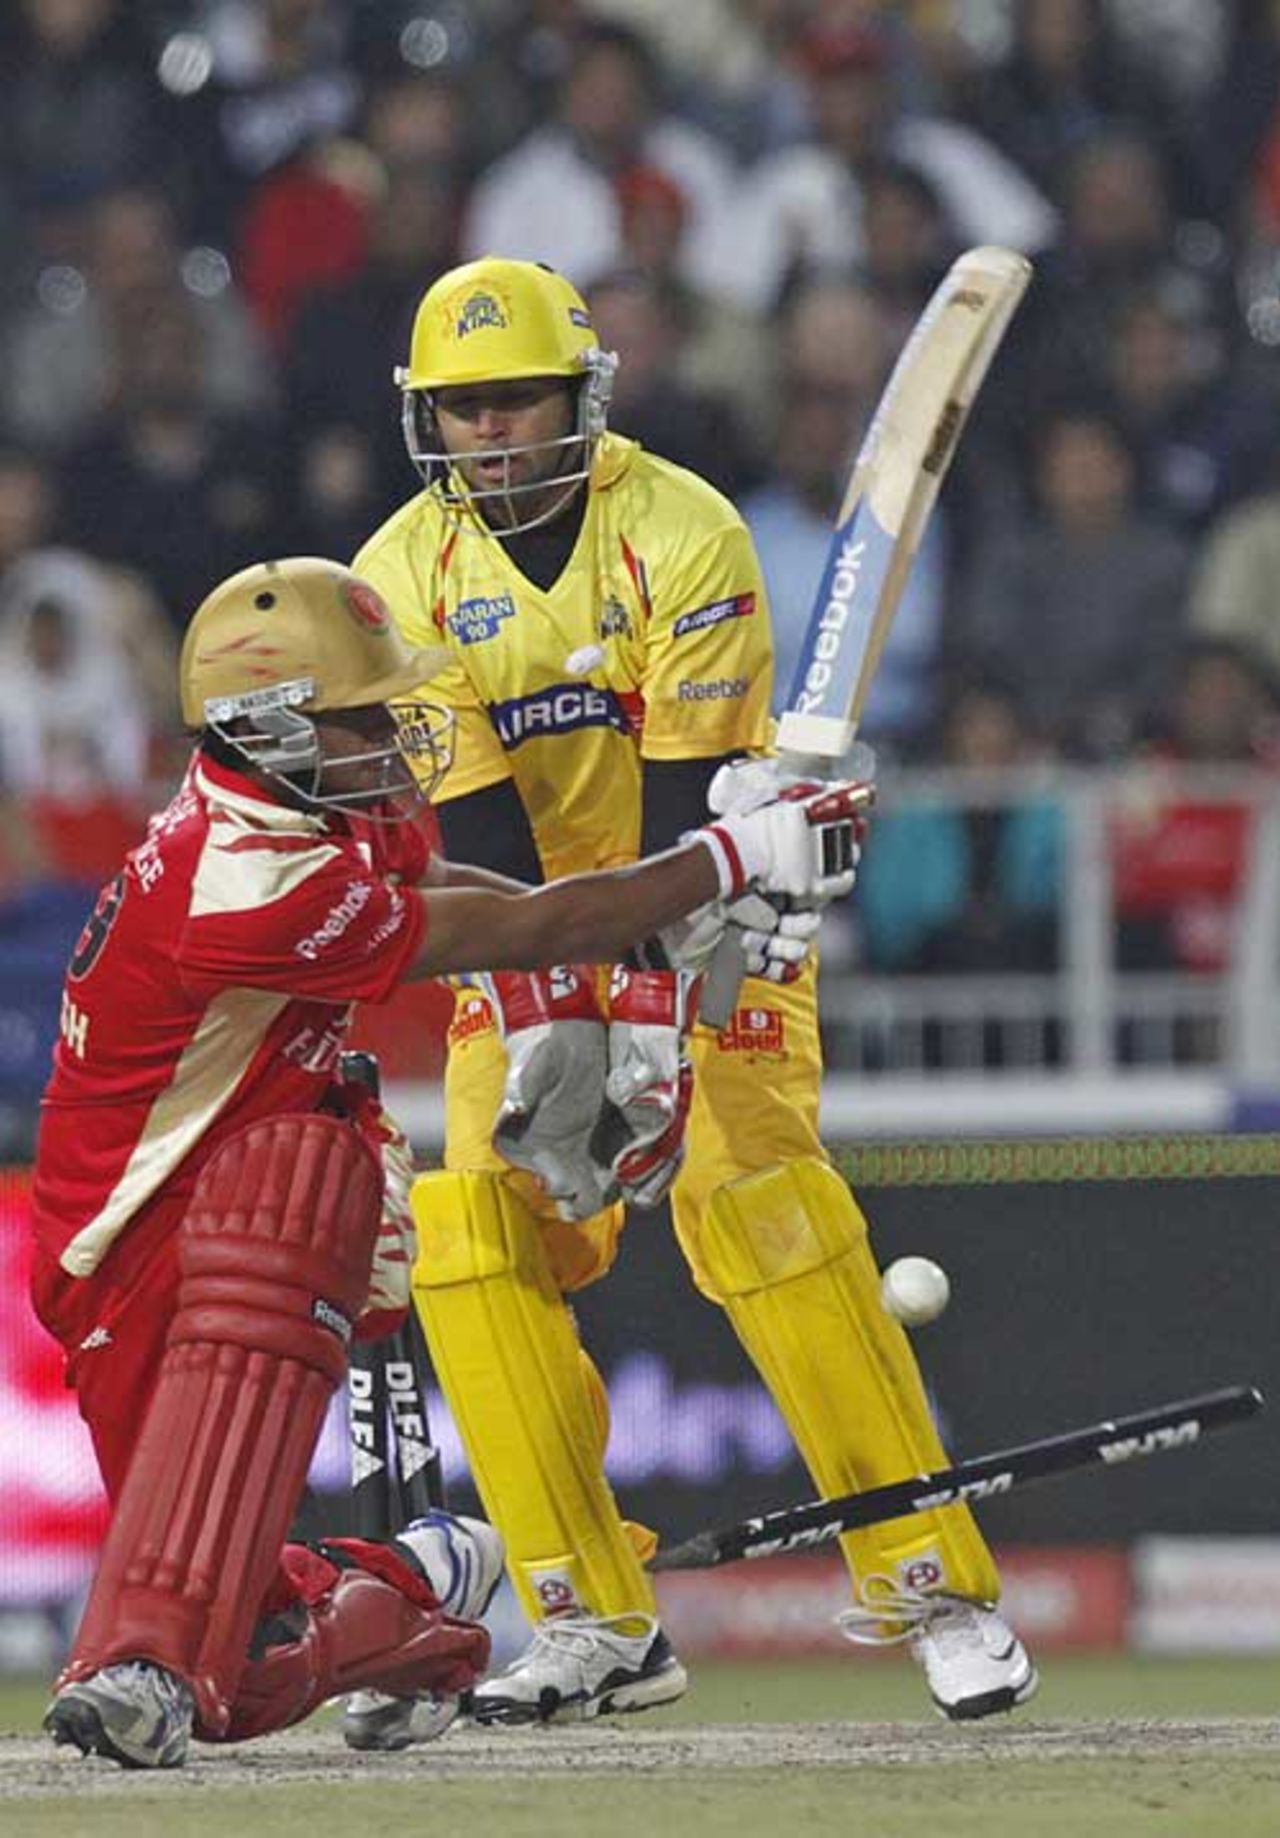 Manish Pandey is bowled for a crucial 48, Bangalore Royal Challengers v Chennai Super Kings, IPL, second semi-final, Johannesburg, May 23, 2009